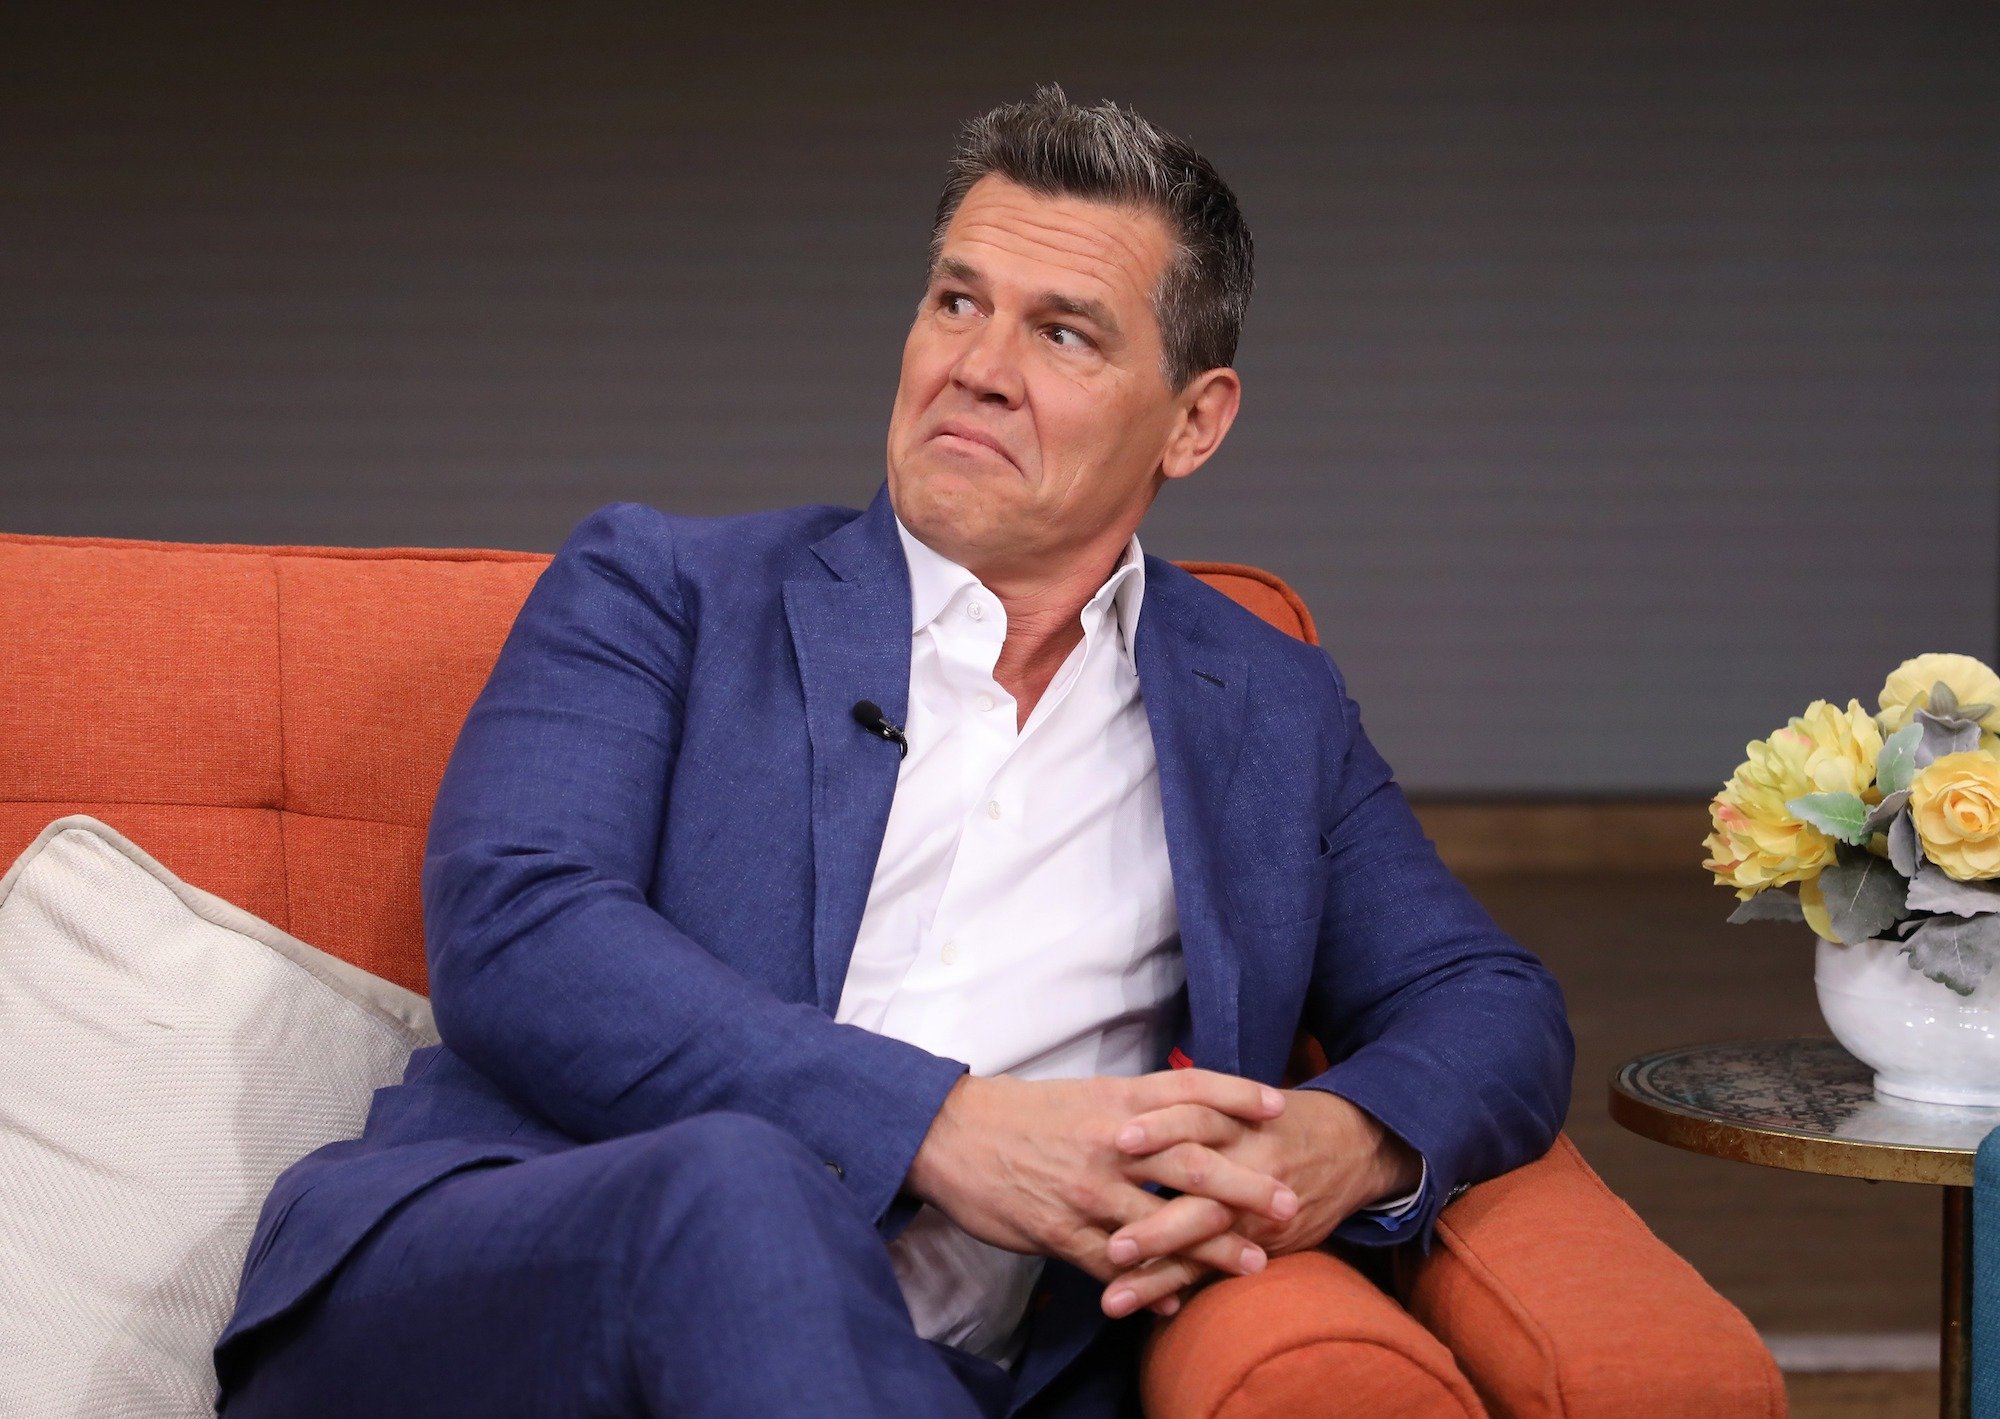 Josh Brolin frowning in surprise, looking to the left